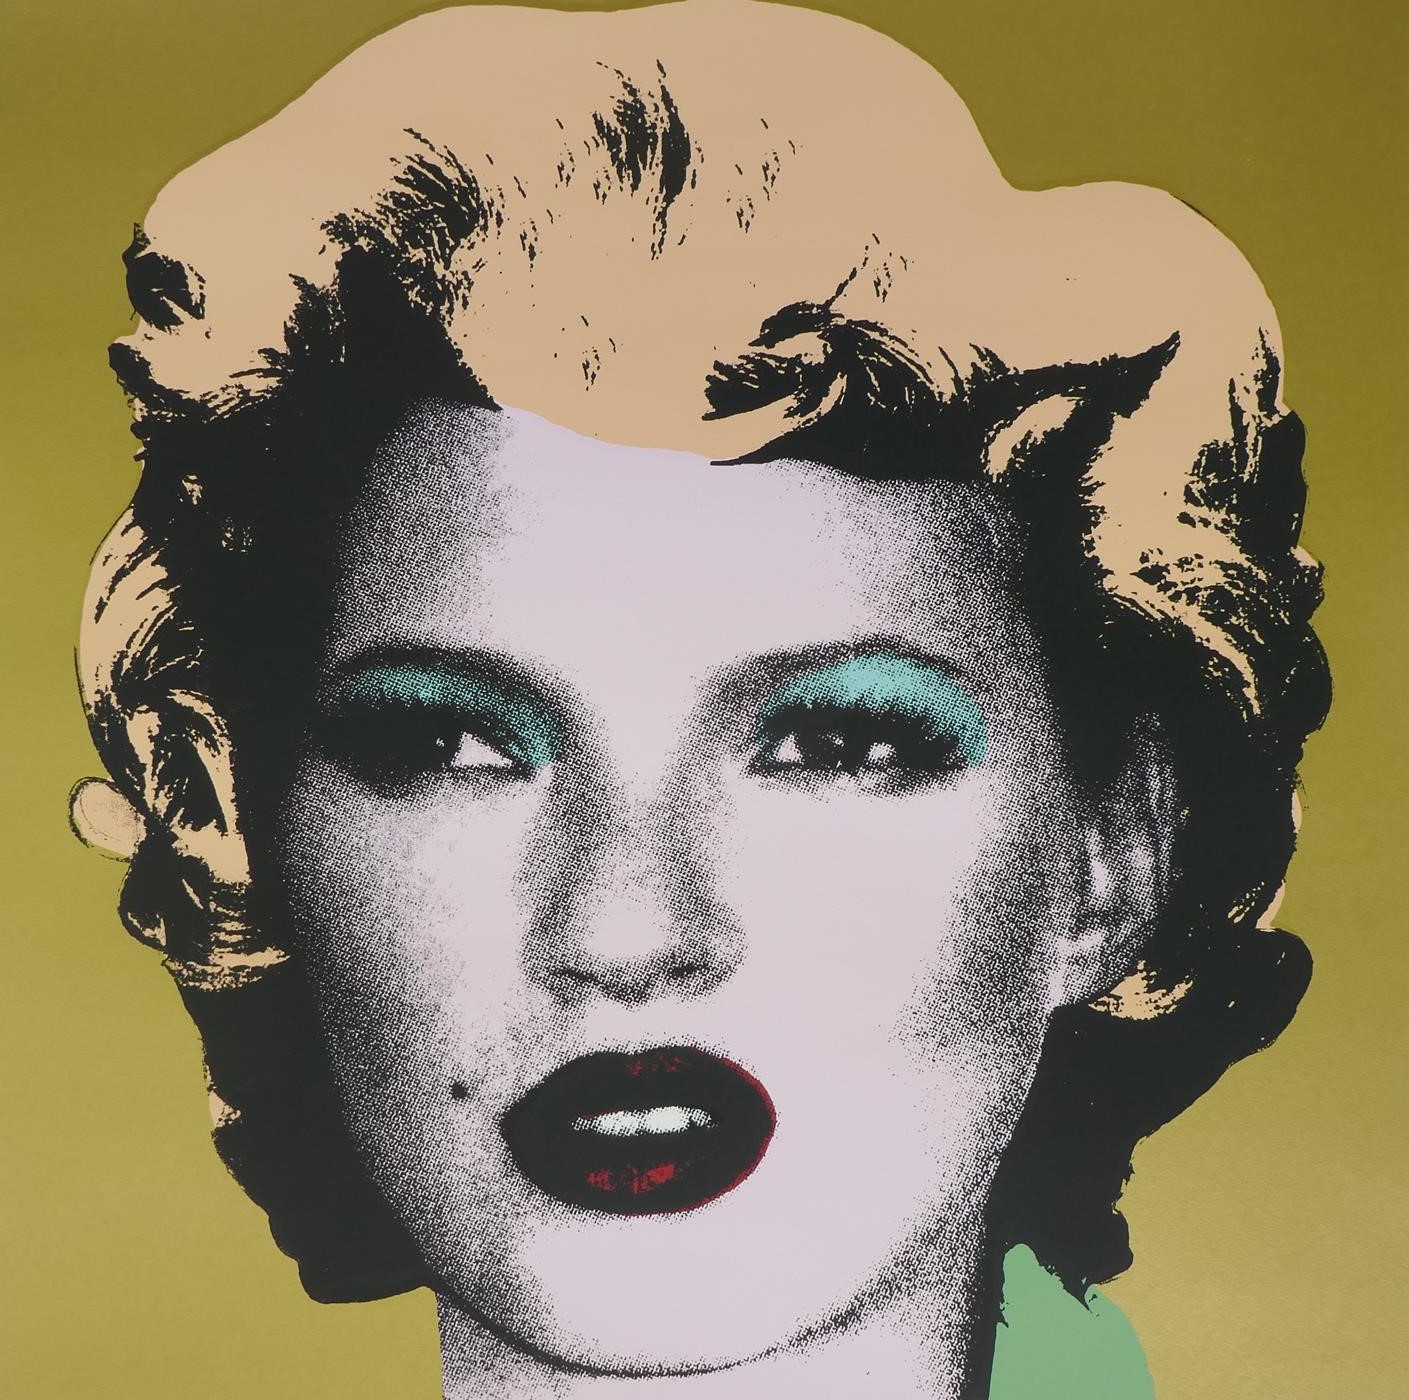 After Banksy, Kate Moss (apricot and gold), limited edition copy screen print No. 27/500, by the